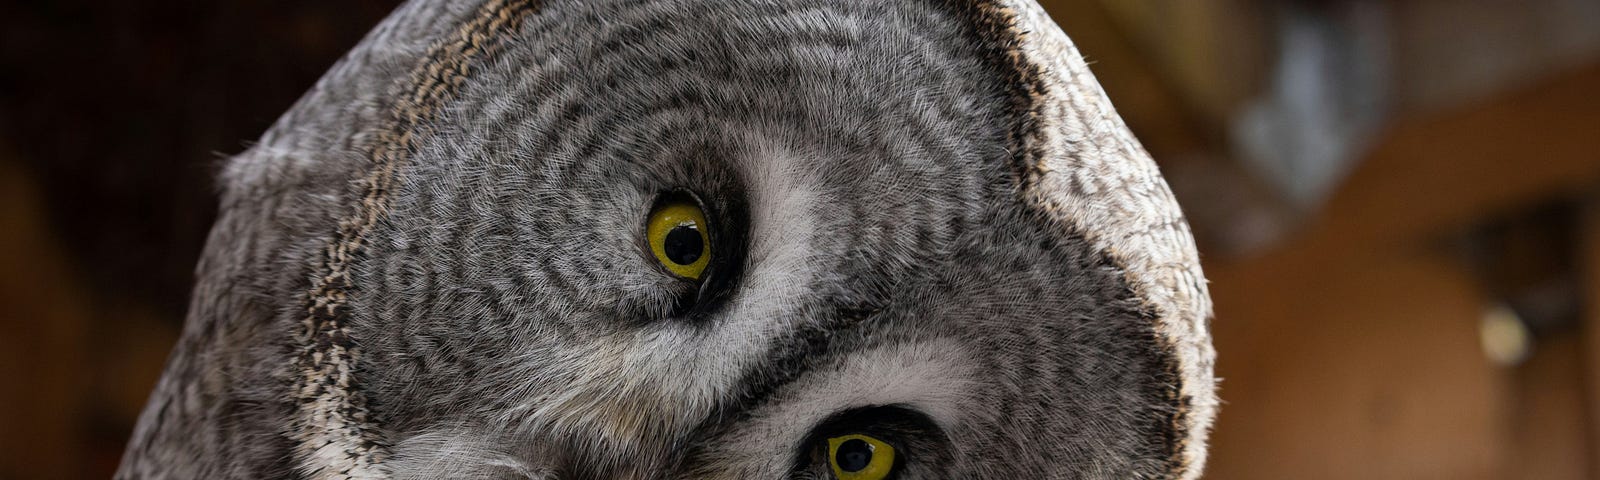 a close-up of an owl tilting his head in curiosity at the camera.